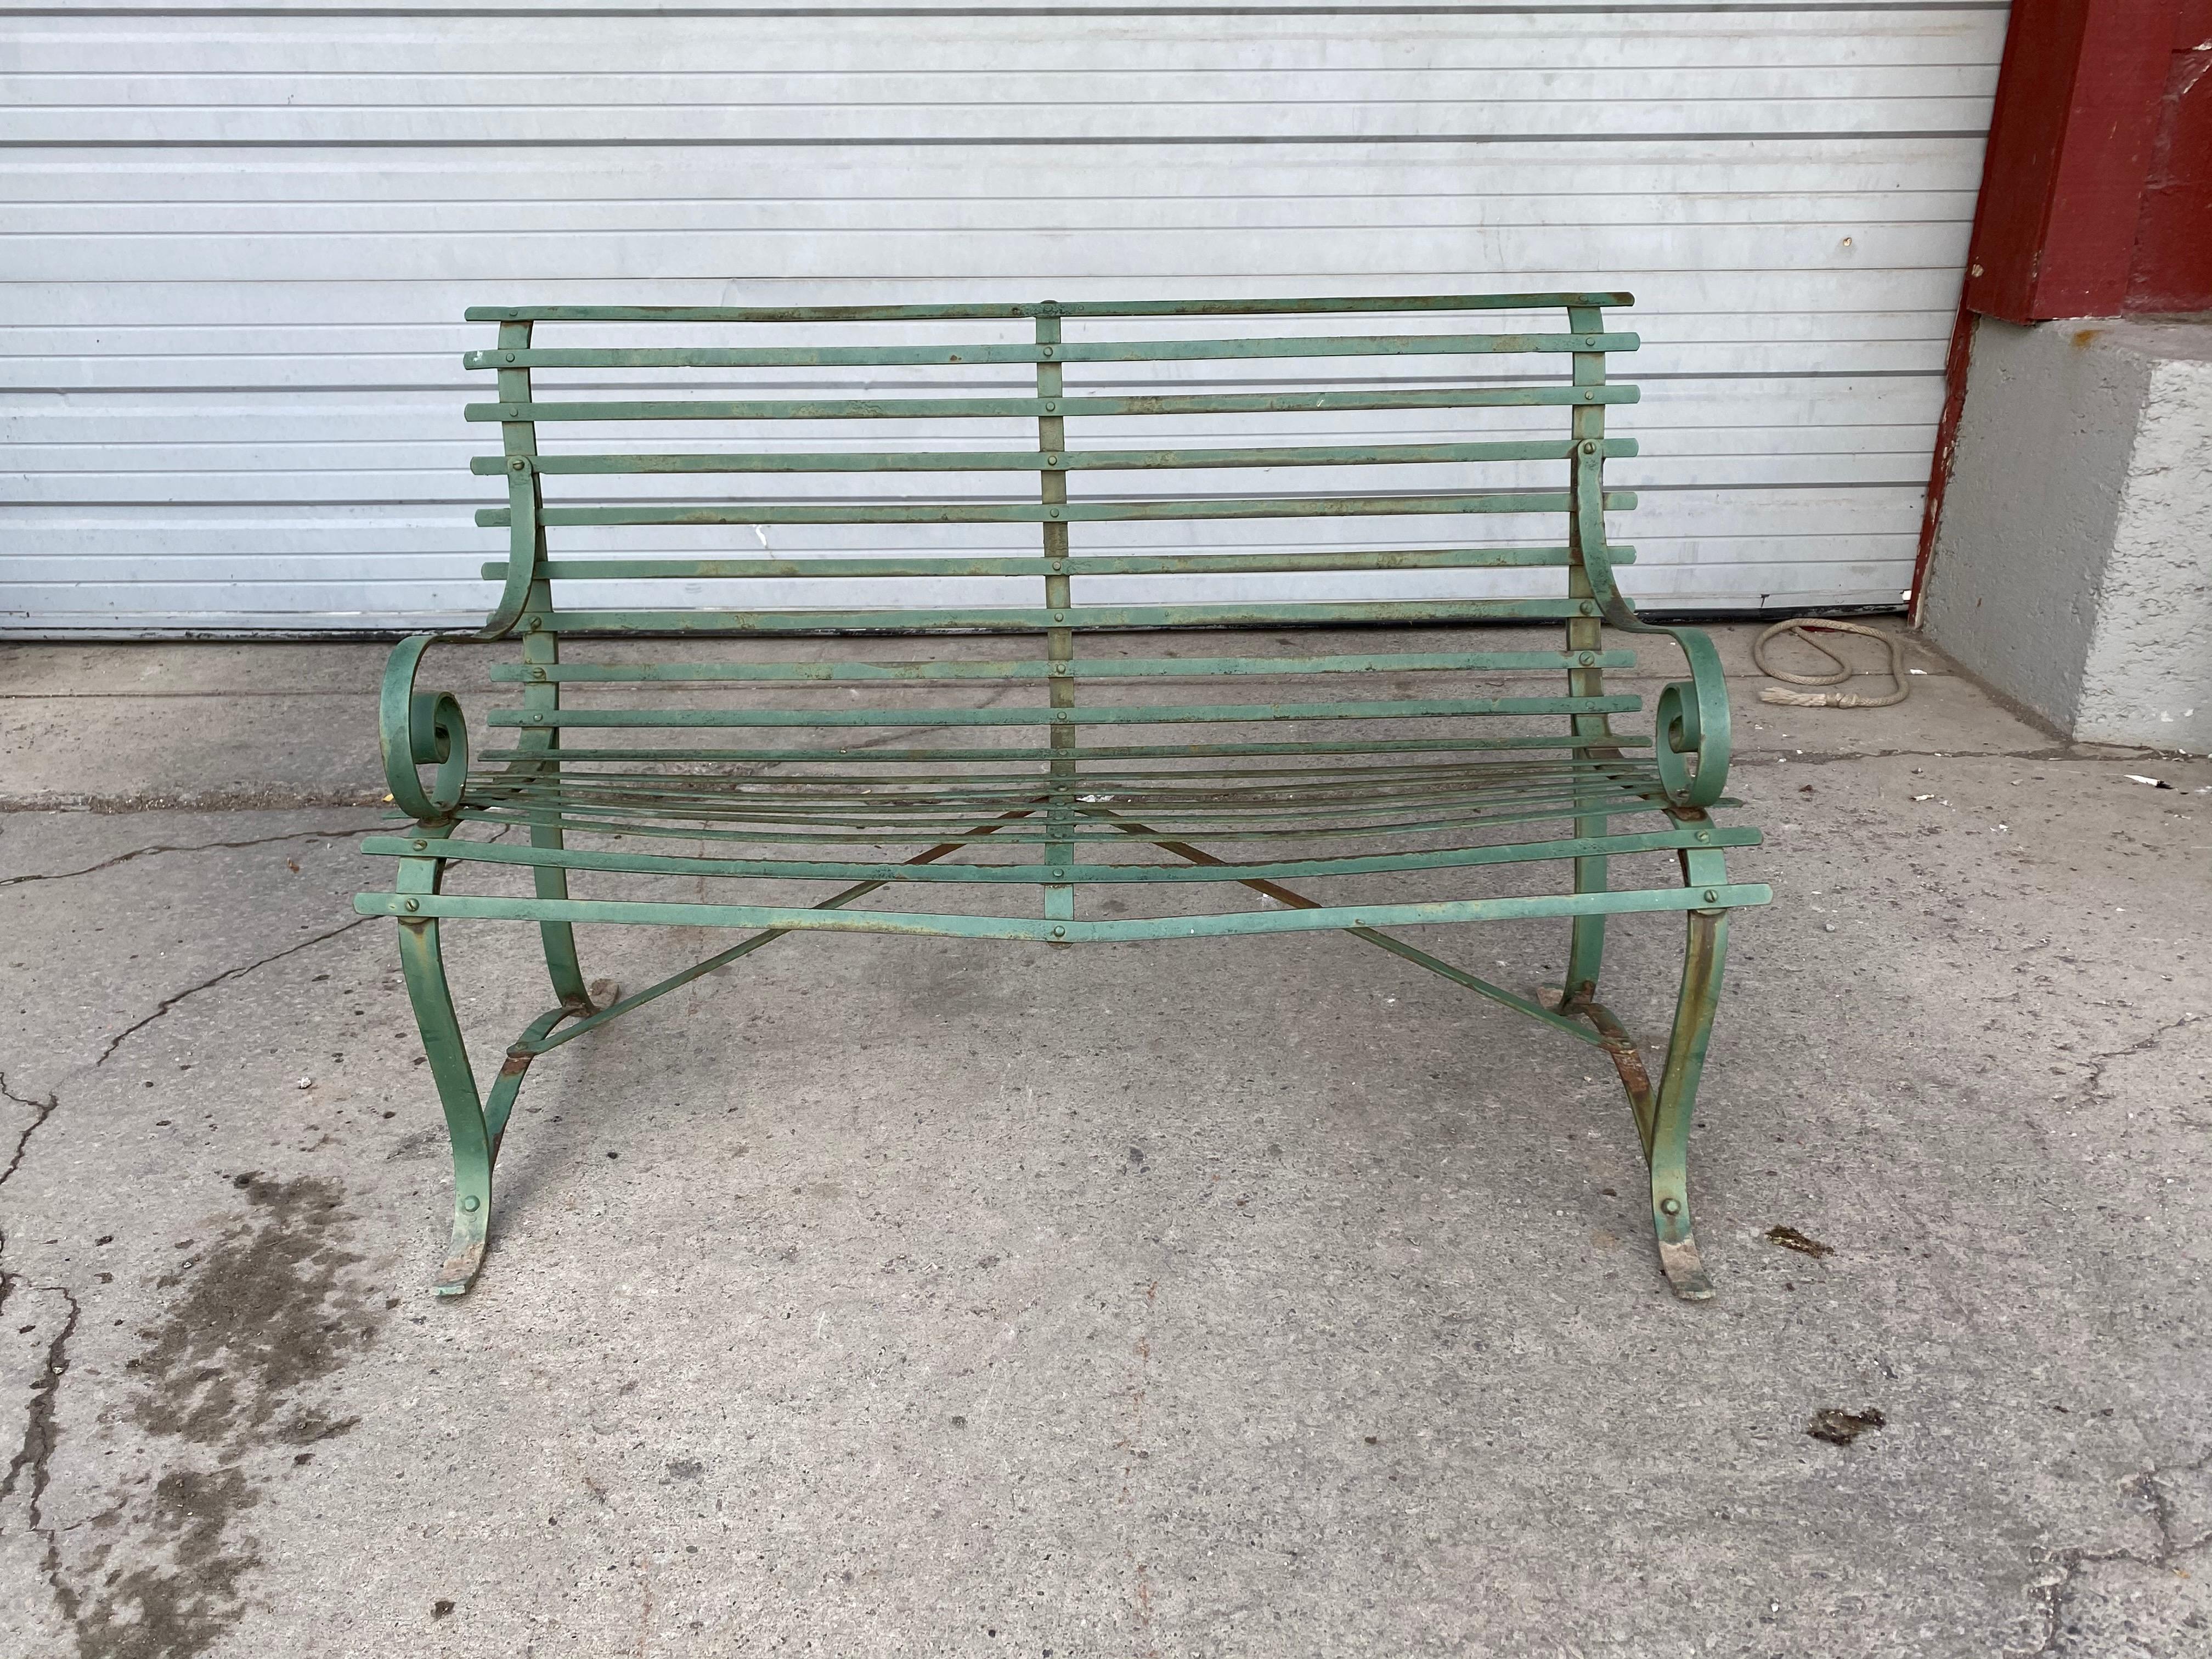 A simple, classic late 19th century, slat design wrought iron garden bench. Beautiful lines, Classic styling and design, wonderful patina, extremely comfortable.